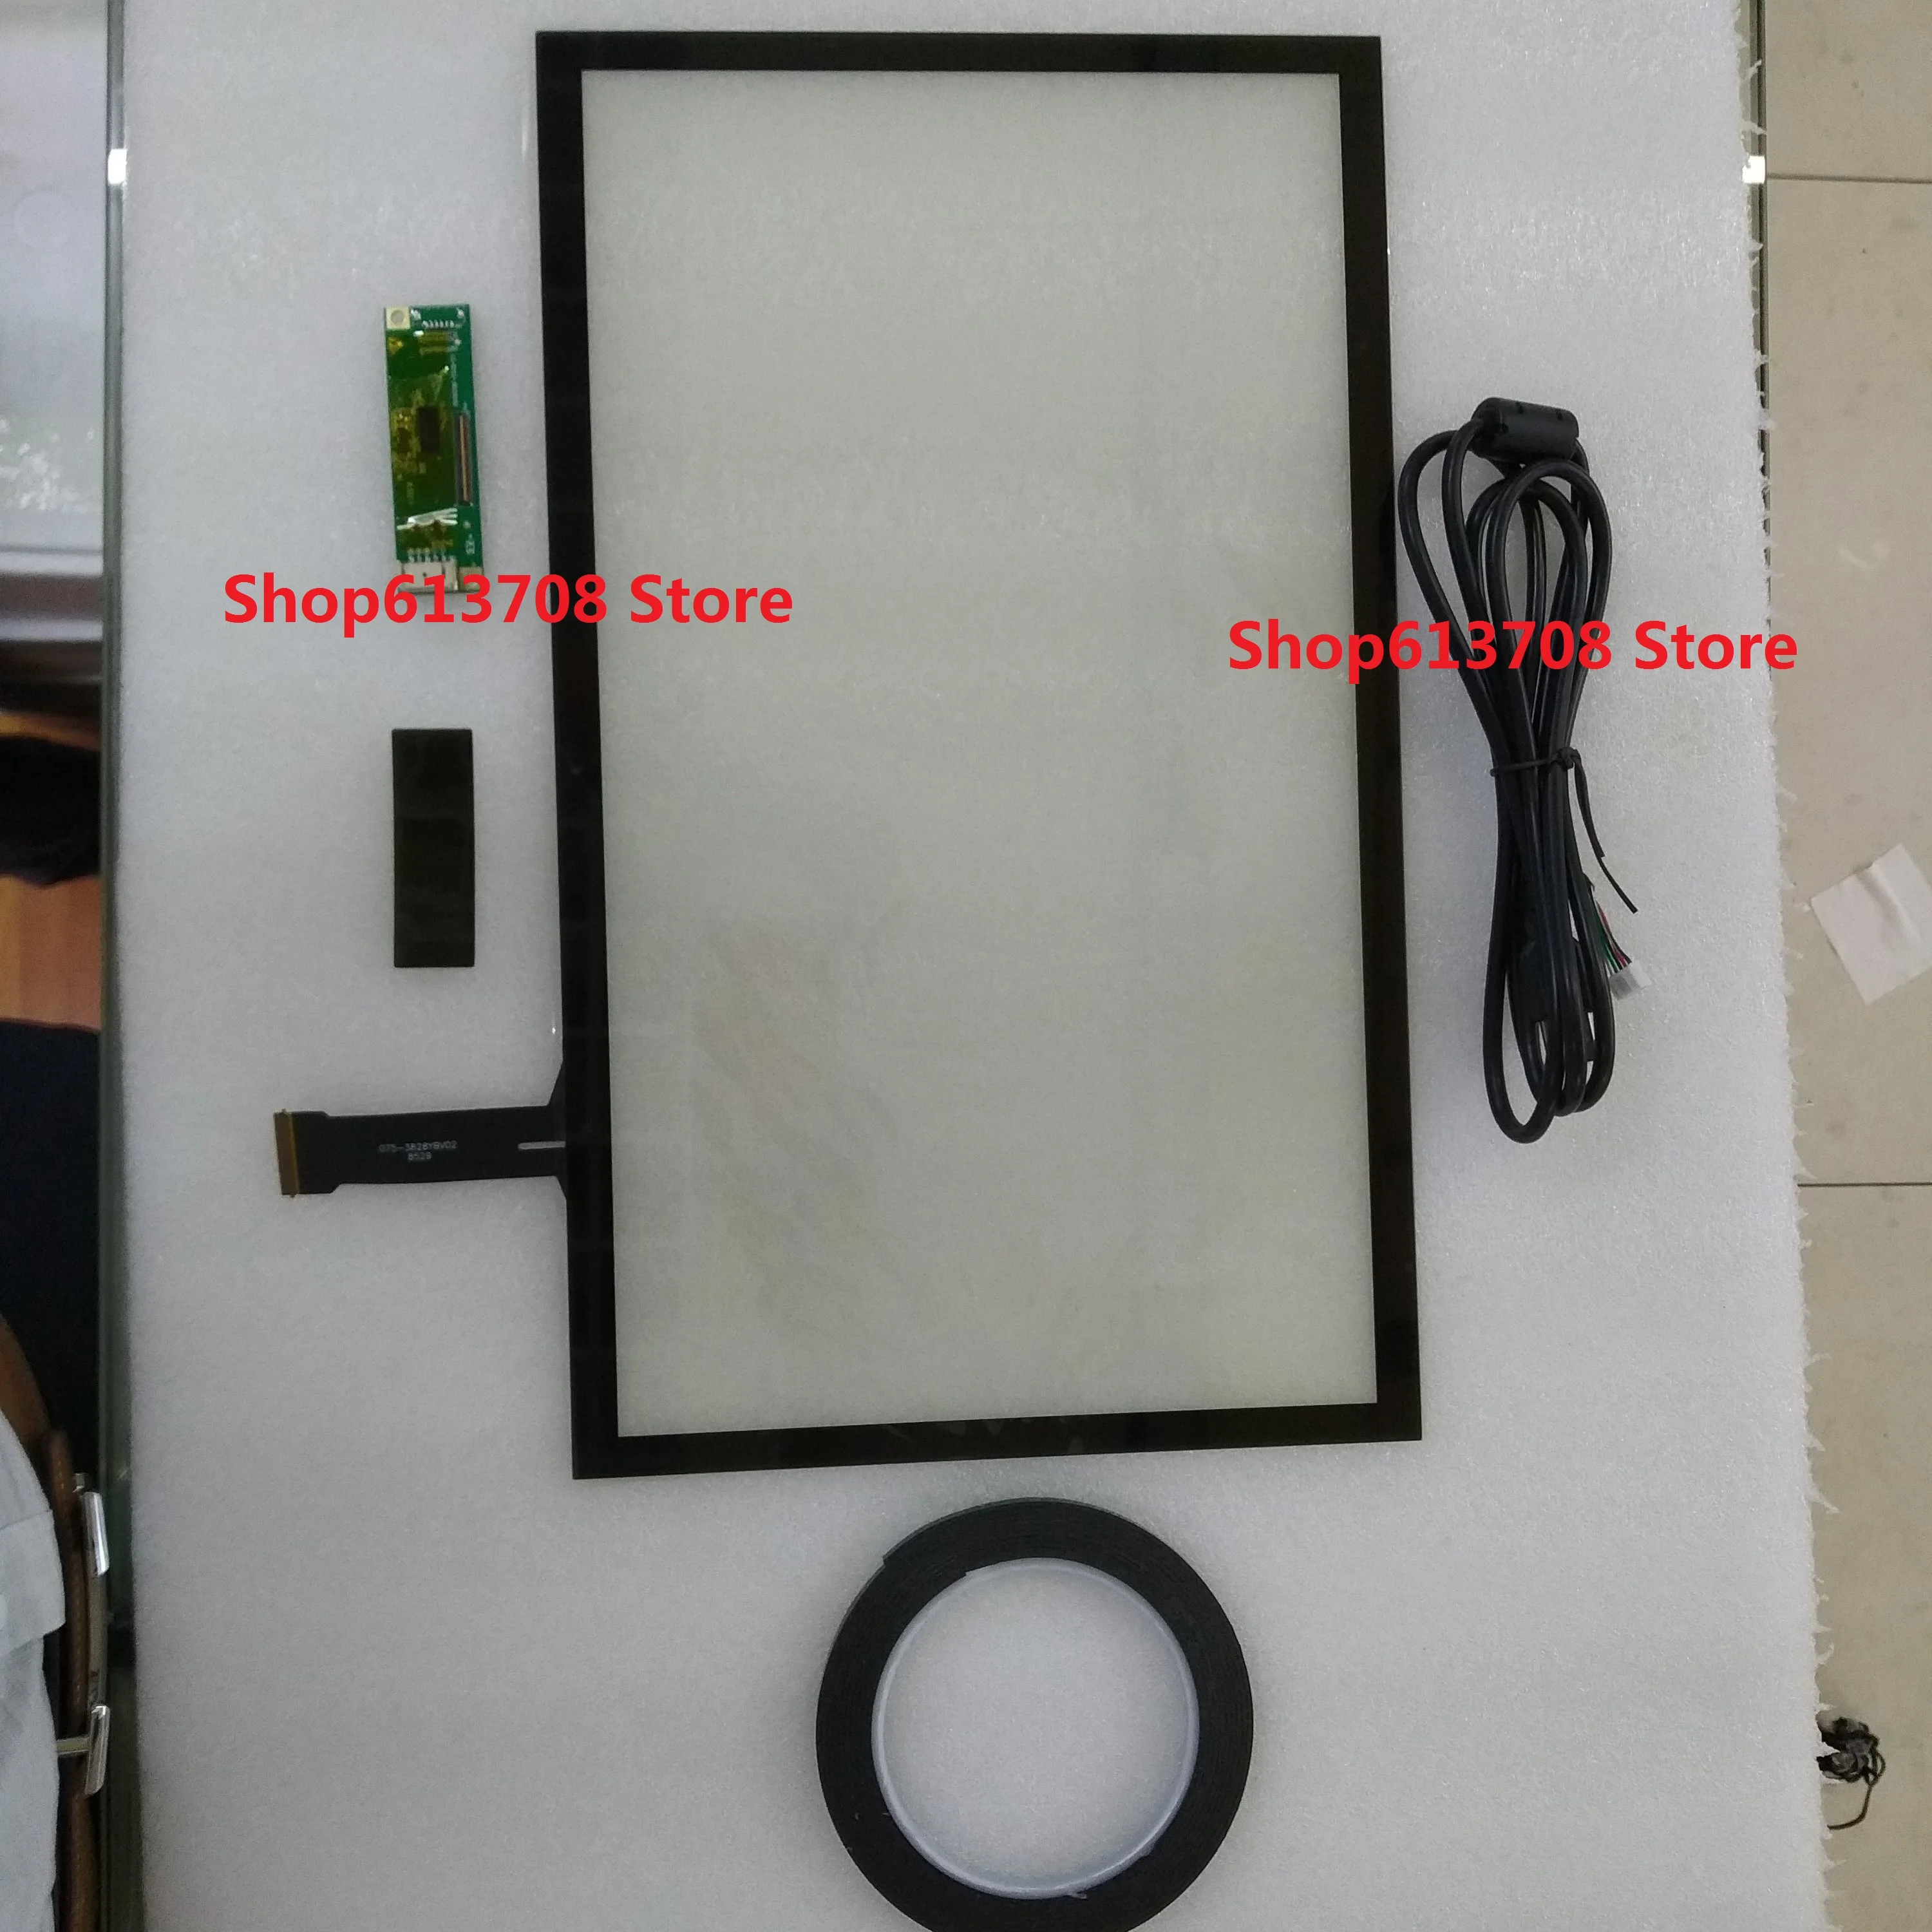 for-lcd-display-156-panel-screen-16-10-capacitive-touch-controller-universal